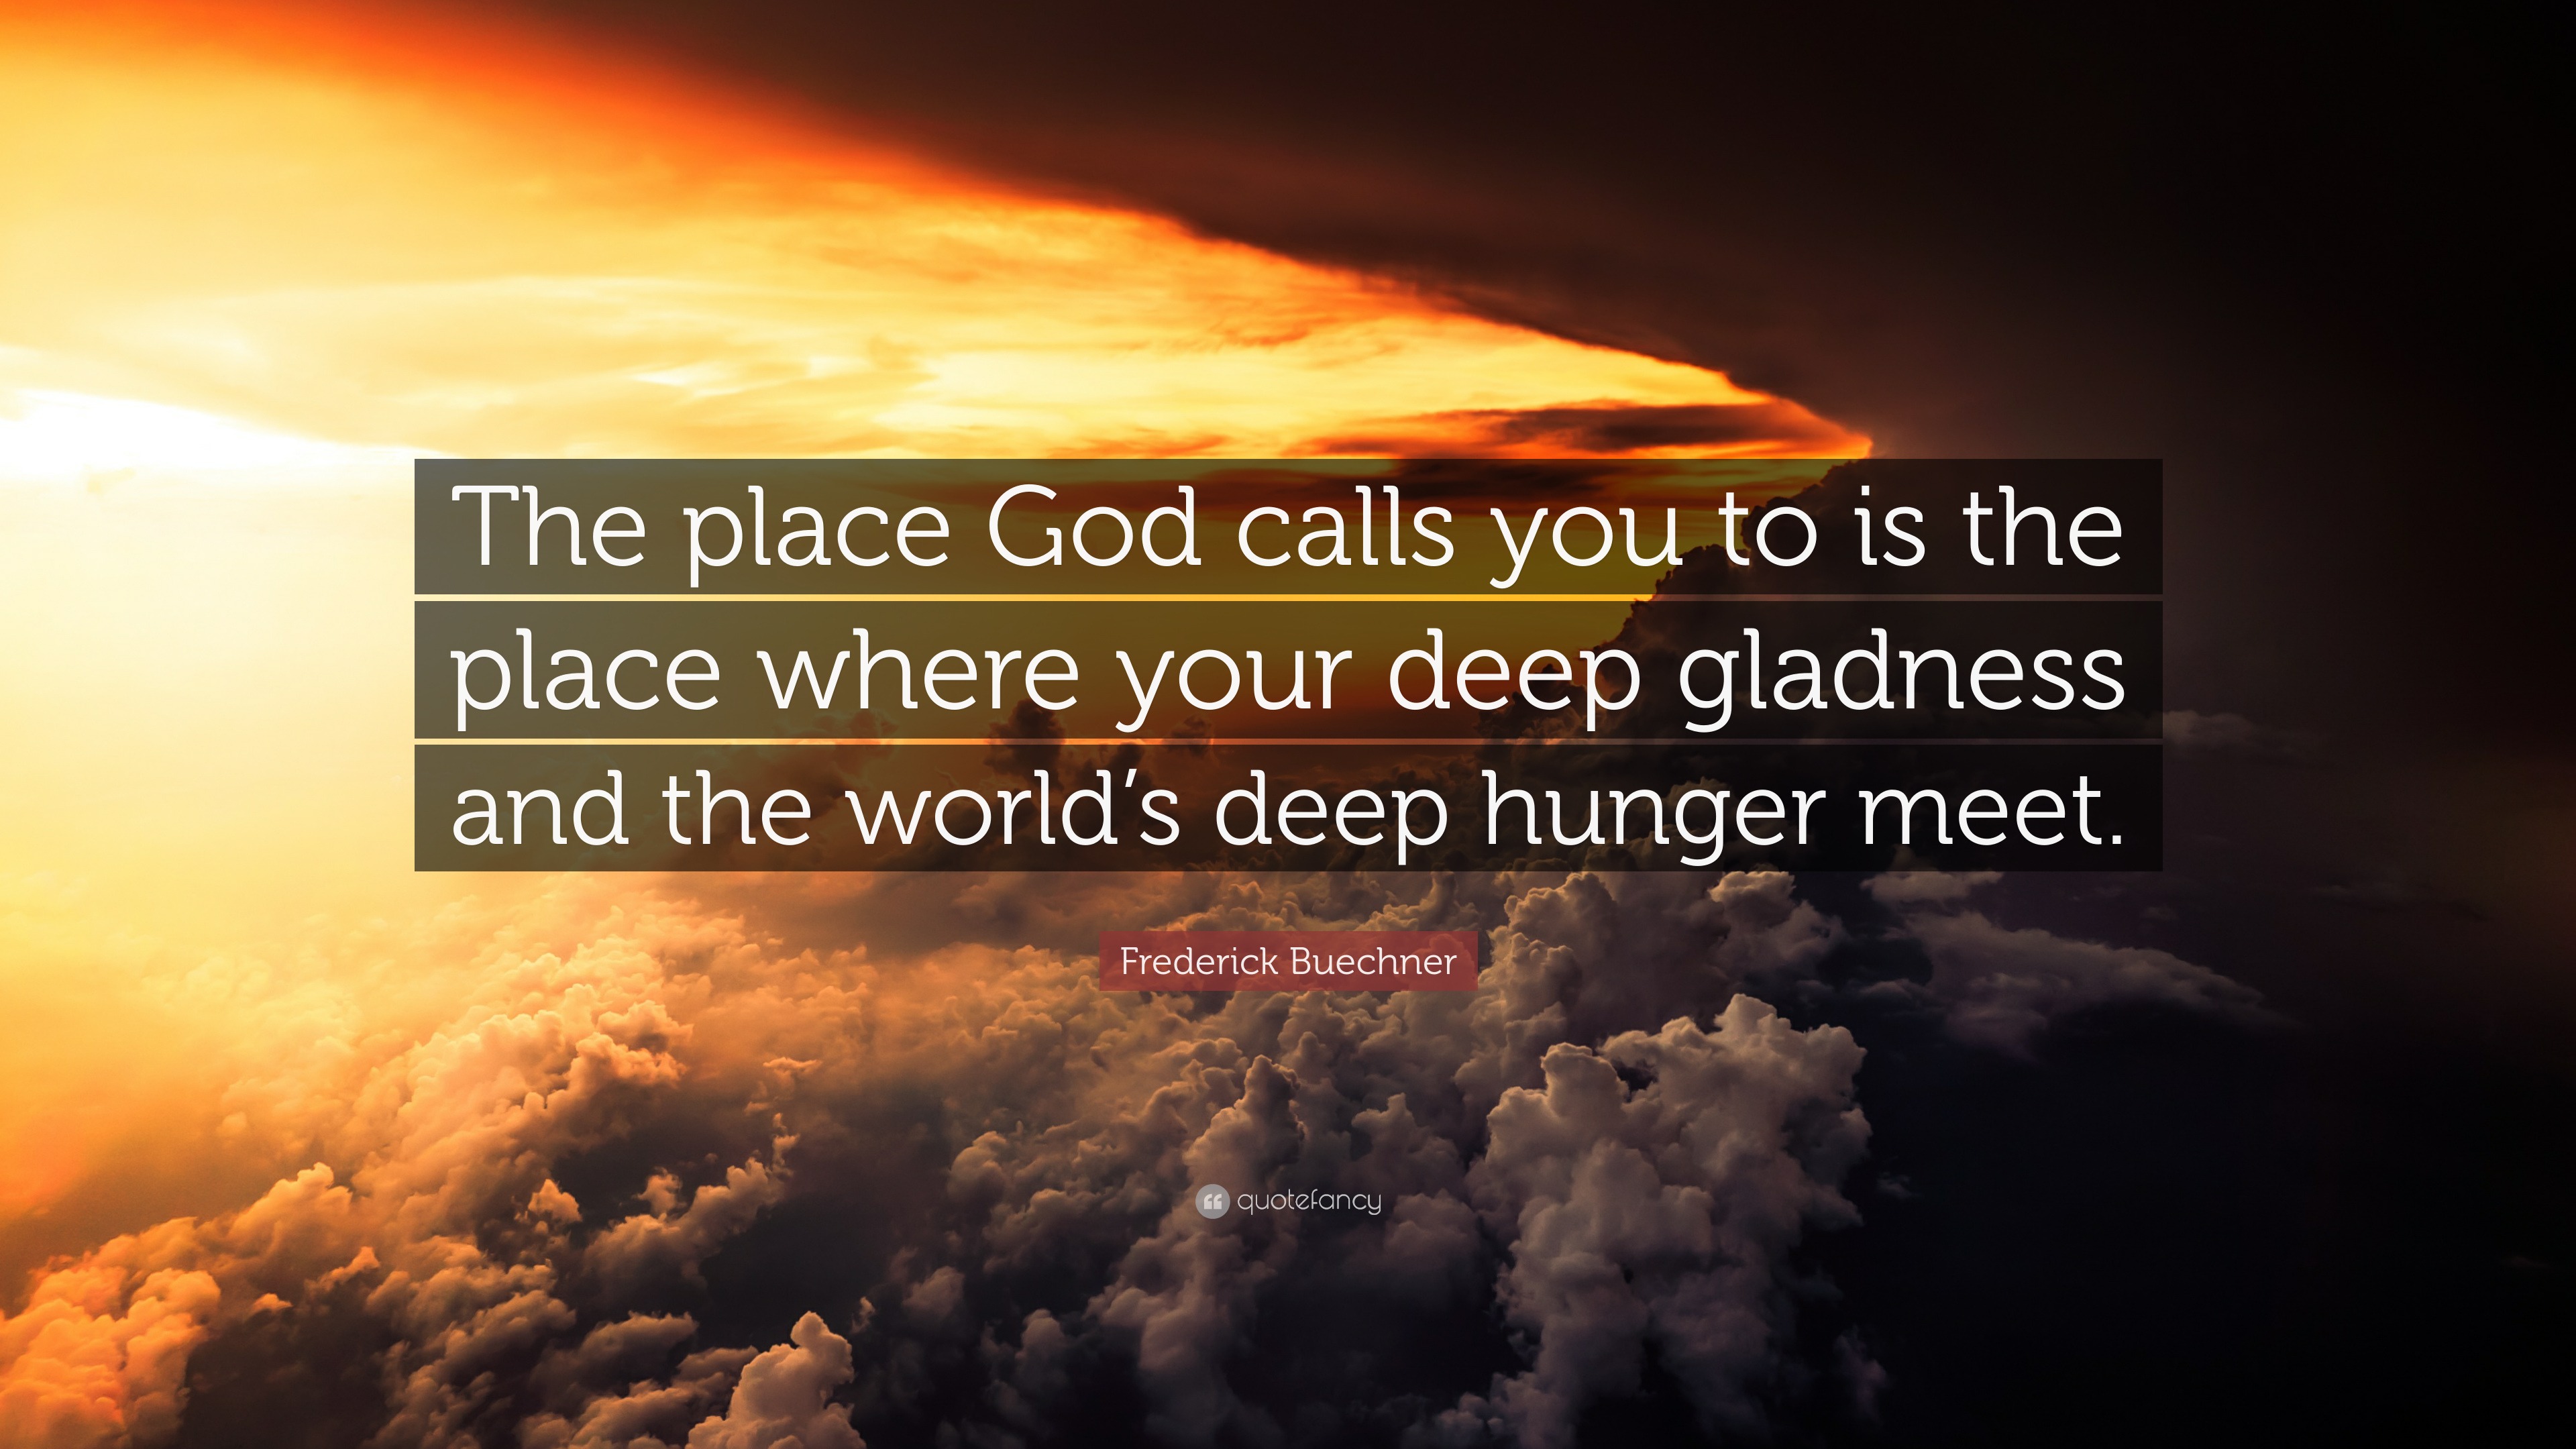 Frederick Buechner Quote: “The place God calls you to is the place